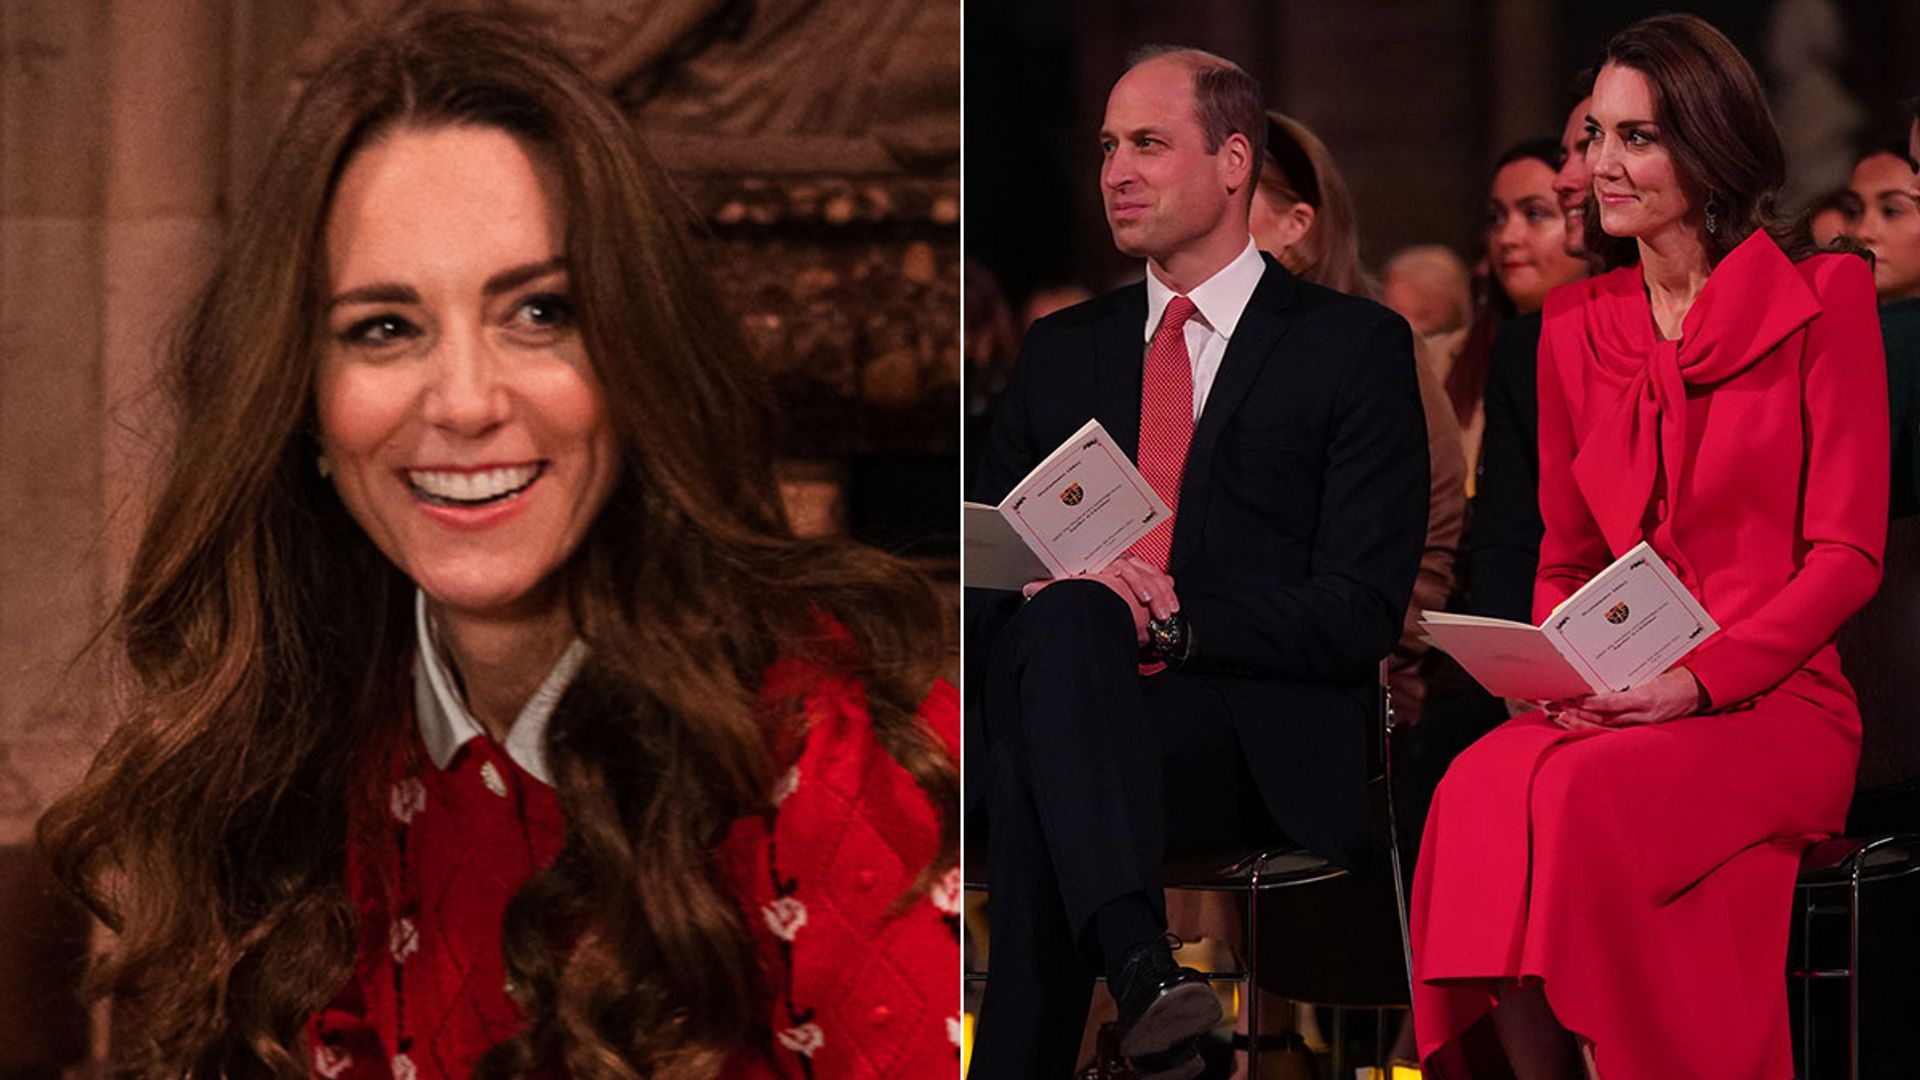 Kate Middleton joins Tom Walker for festive piano performance after finding 'great comfort' in music in lockdown